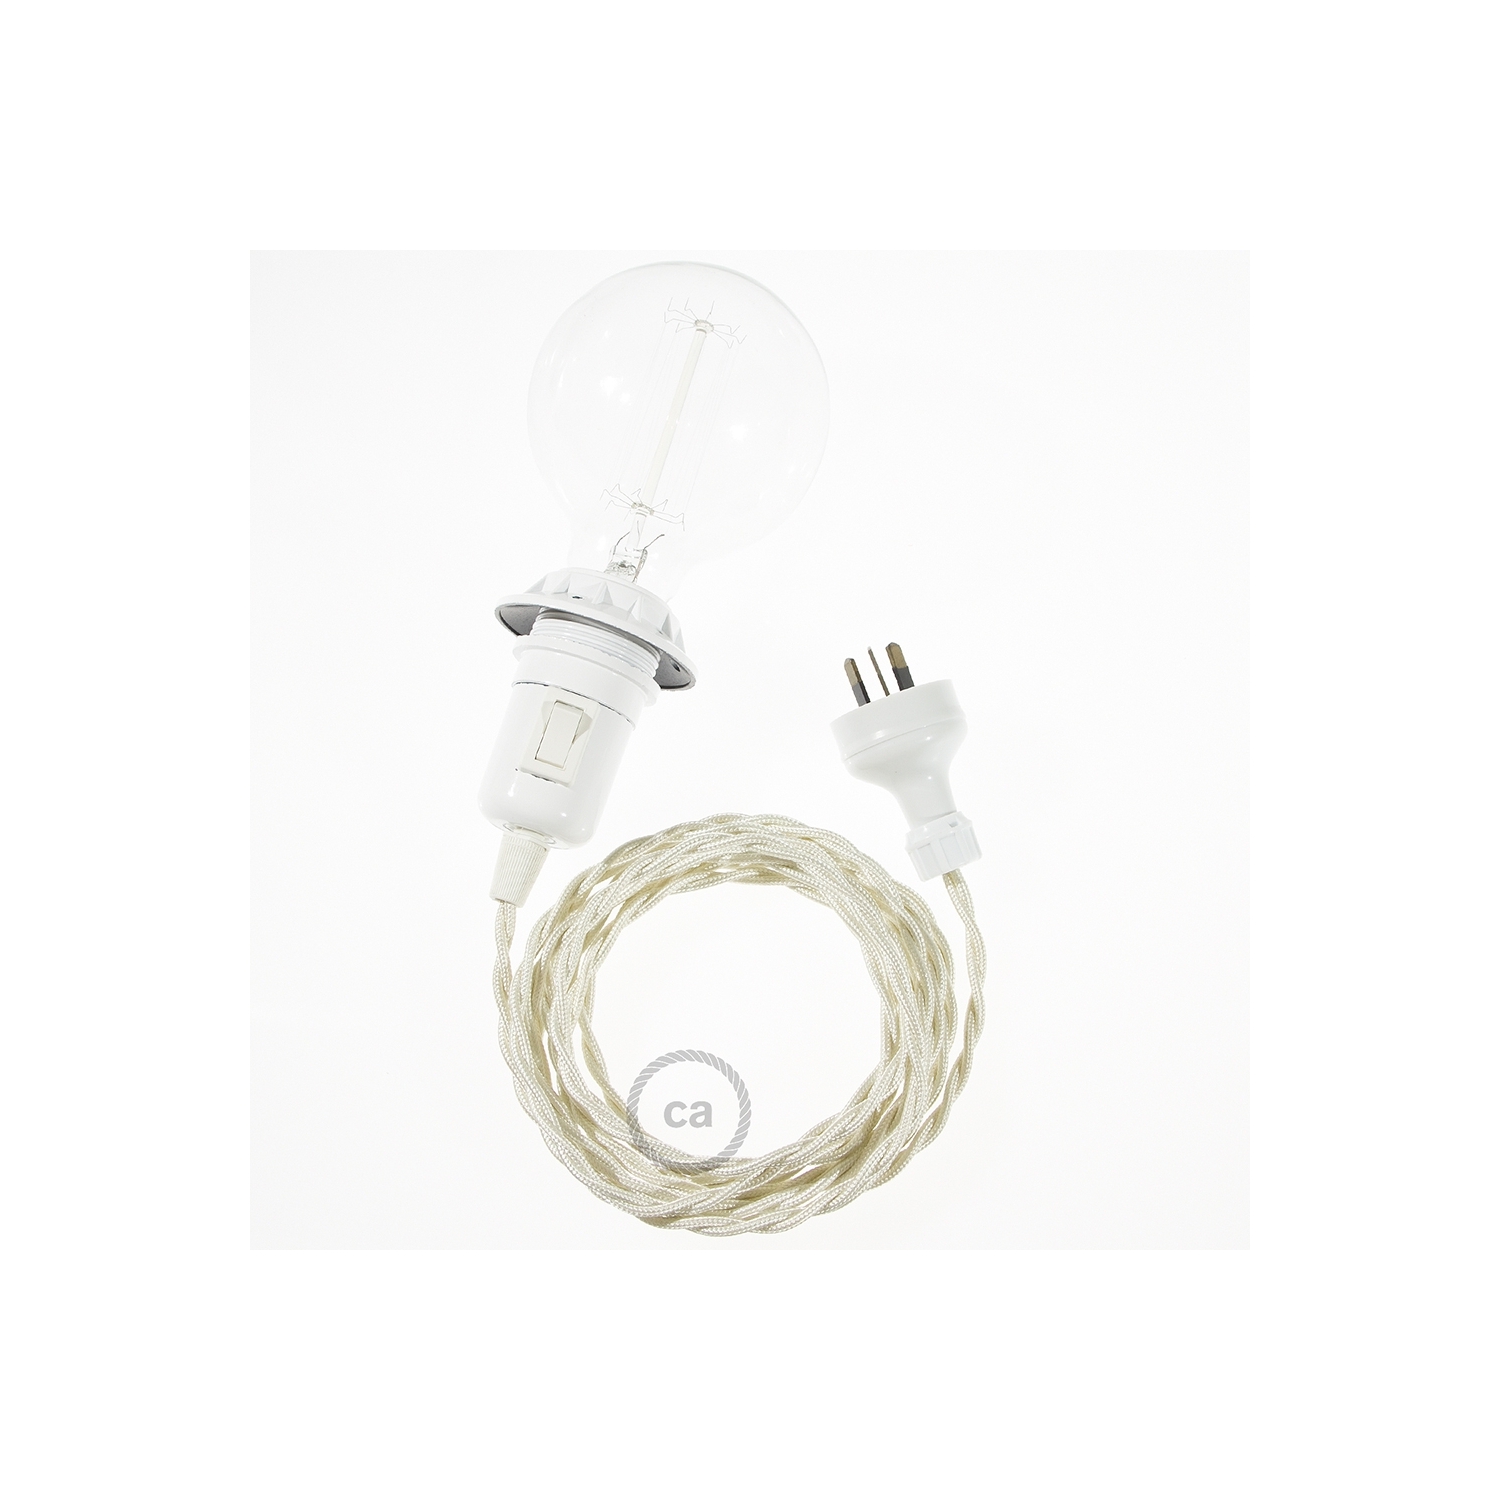 Create your TM00 Ivory Rayon Snake for lampshade and bring the light wherever you want.